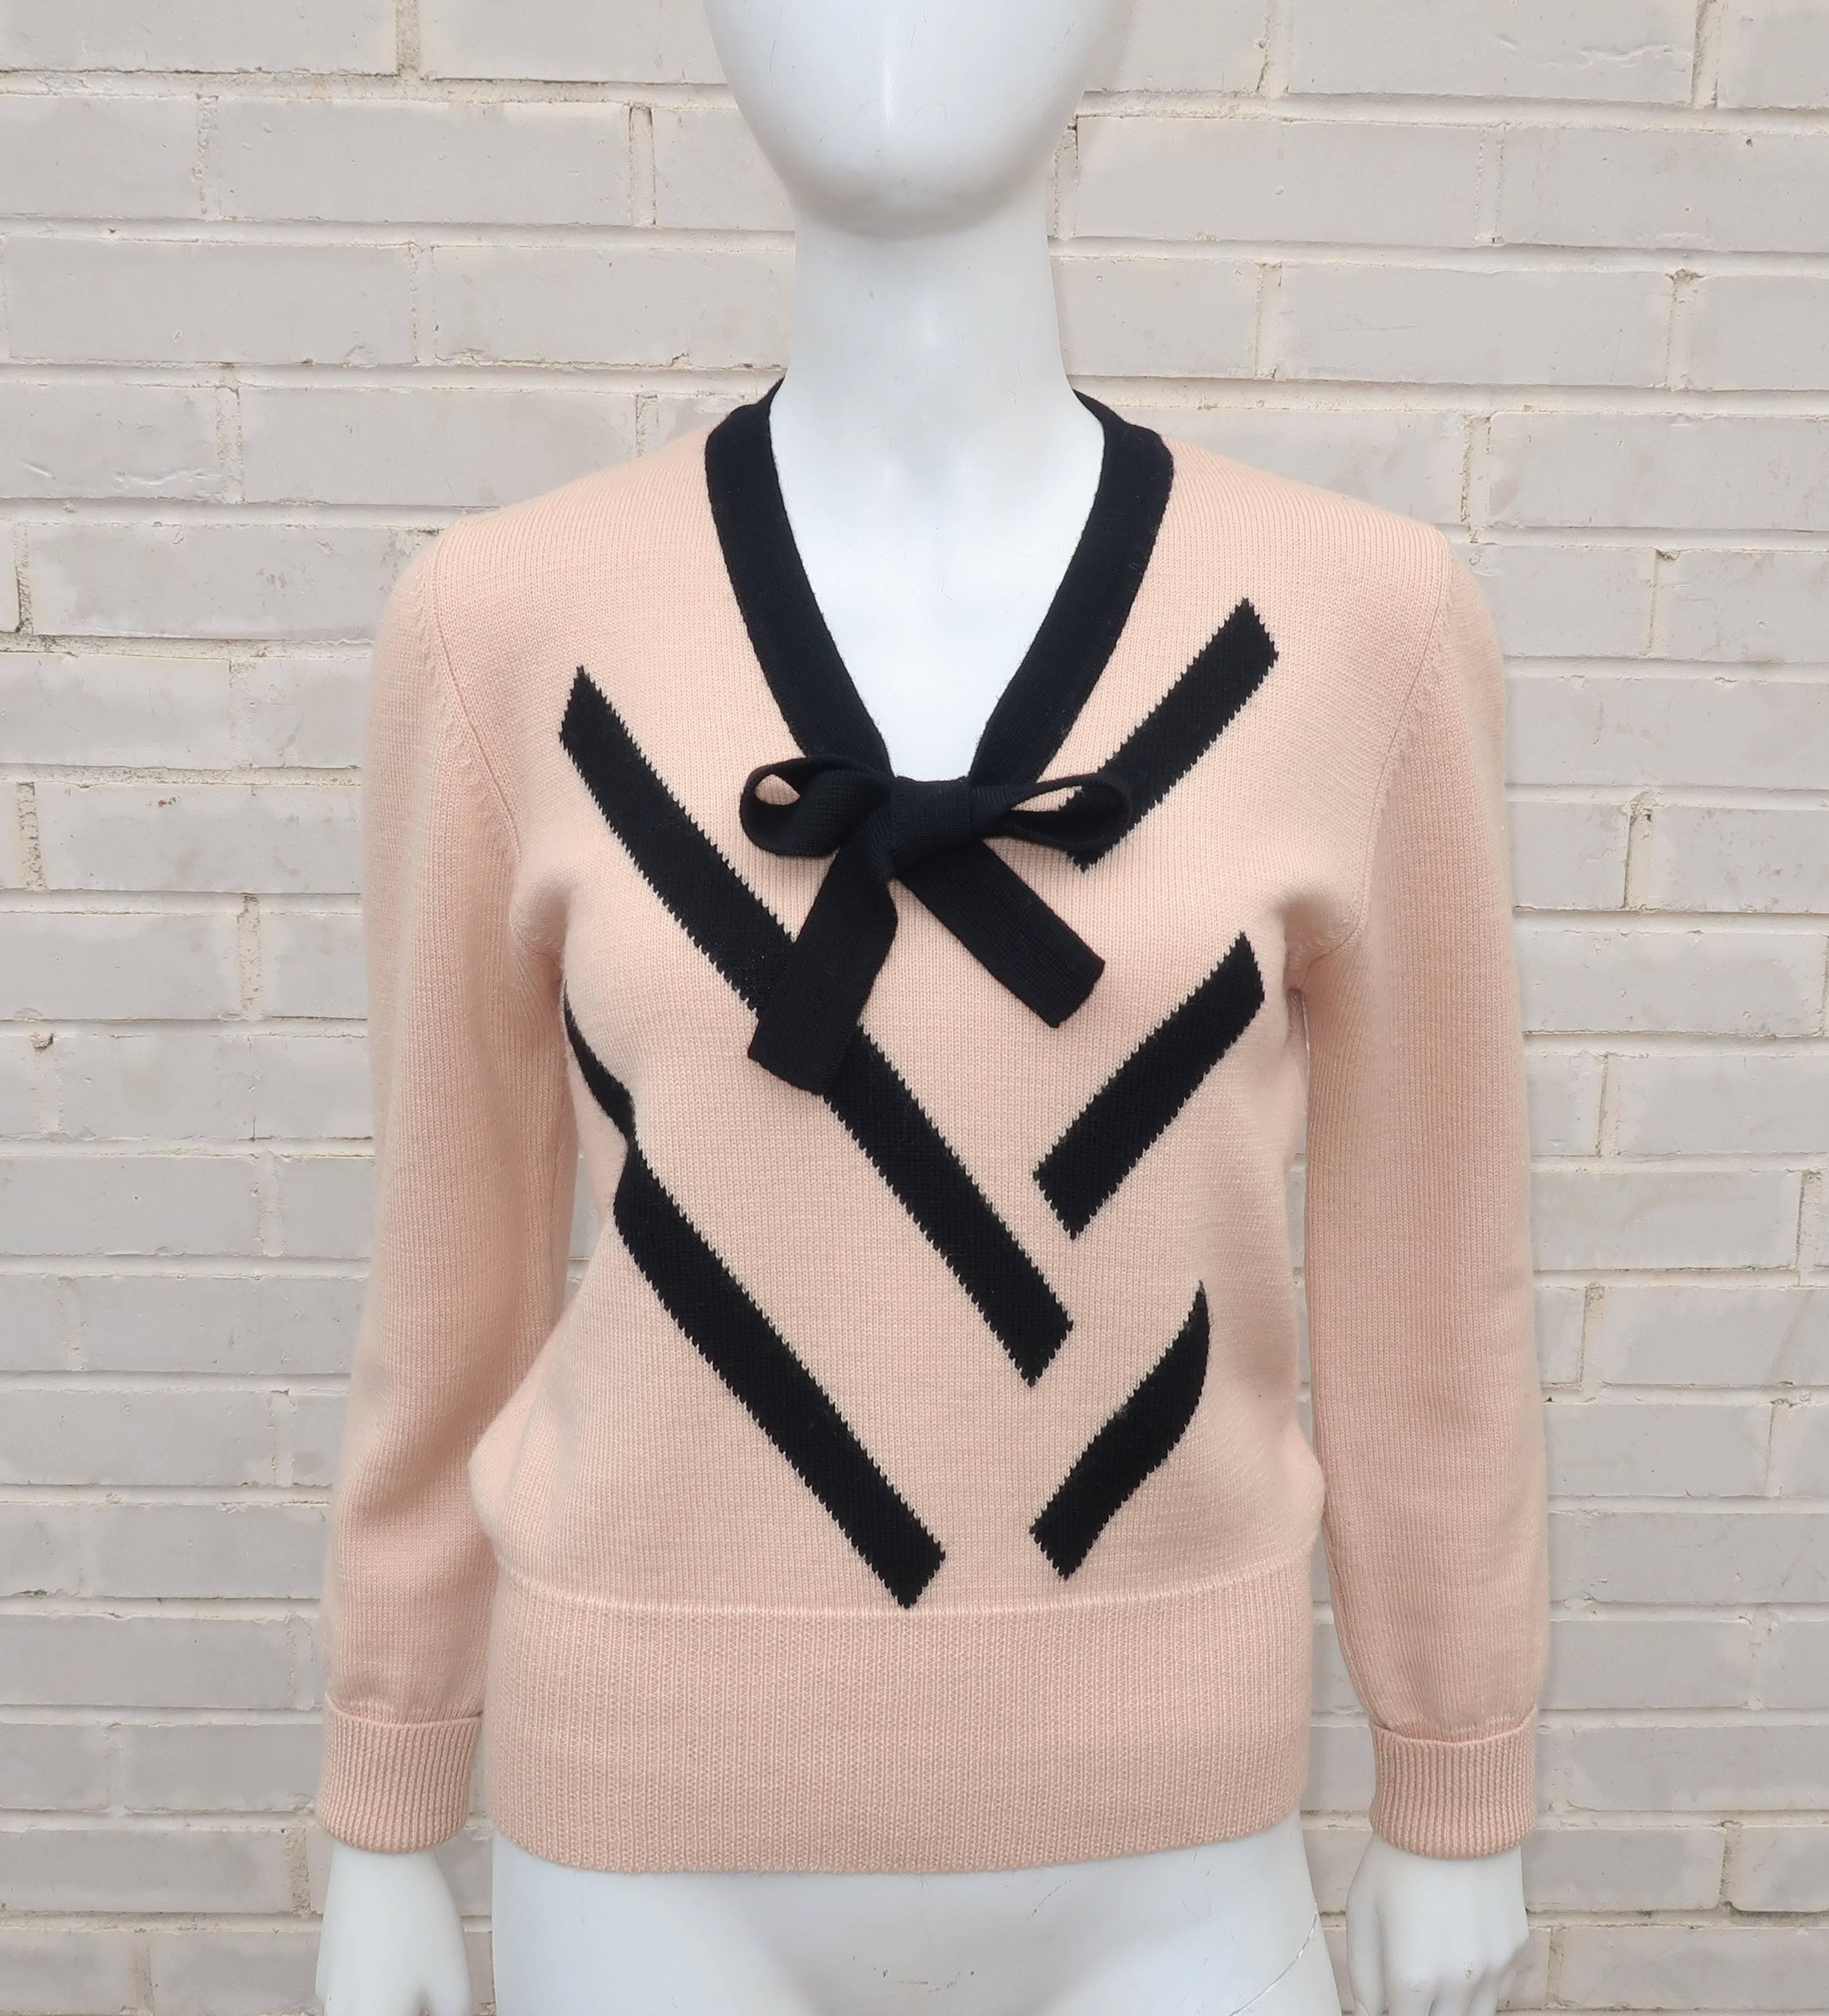 Girlish charm!  This 1980's Sonia Rykiel Knits design combines the classic pairing of black and a light beige ... with just a touch of ballerina pink.  The pullover silhouette is accented with a scoop neck embellished with a tie and the front bodice